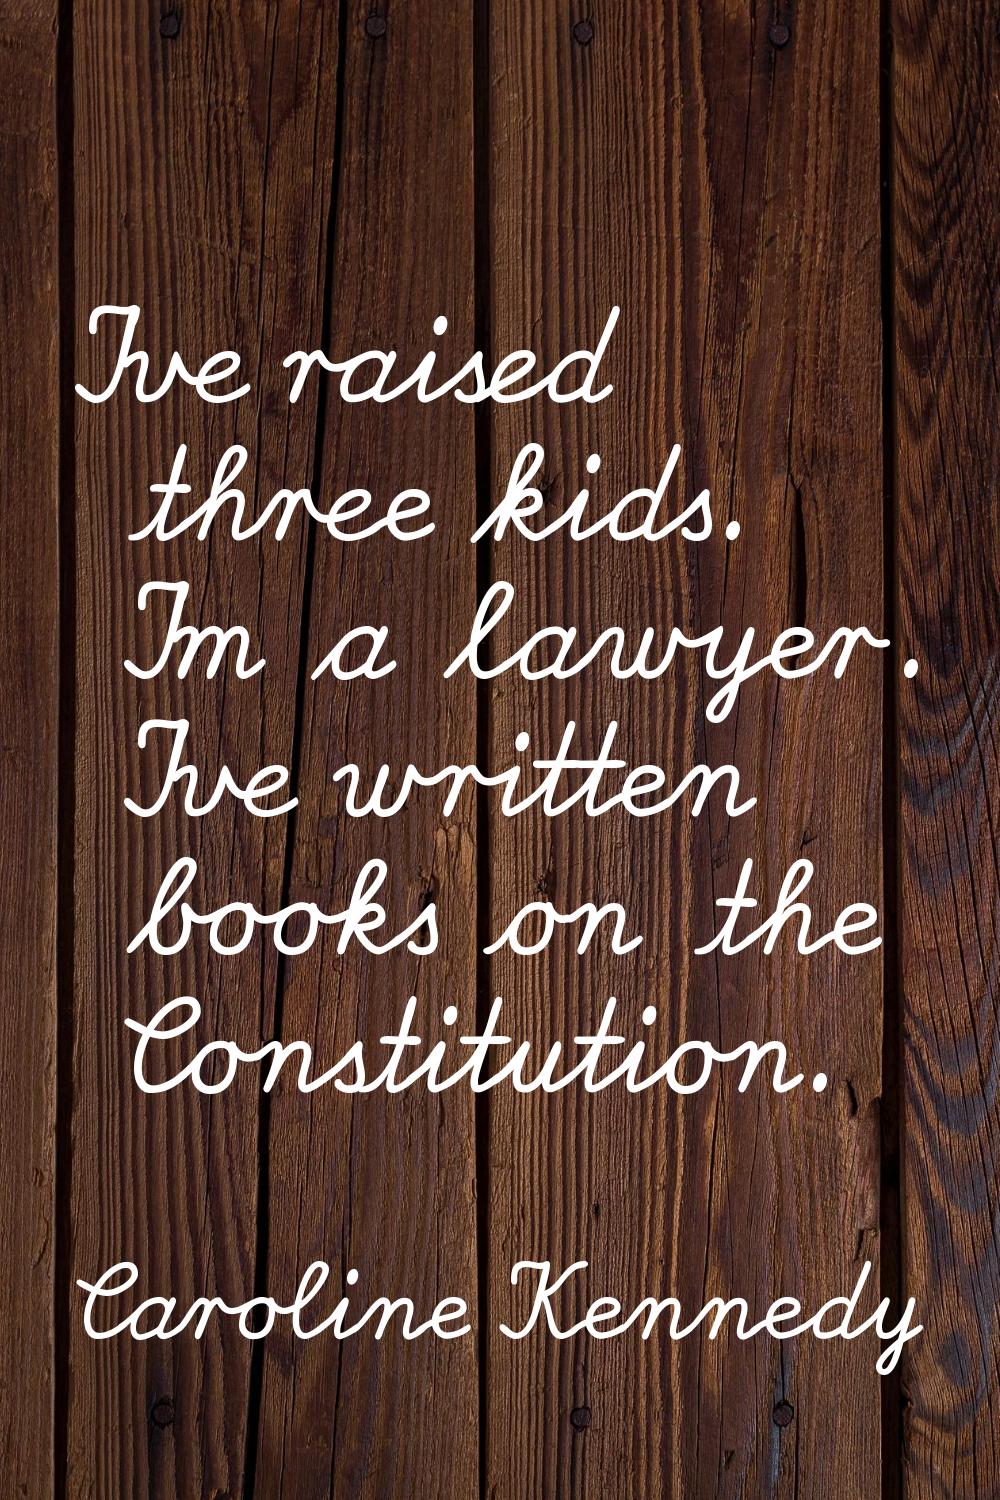 I've raised three kids. I'm a lawyer. I've written books on the Constitution.